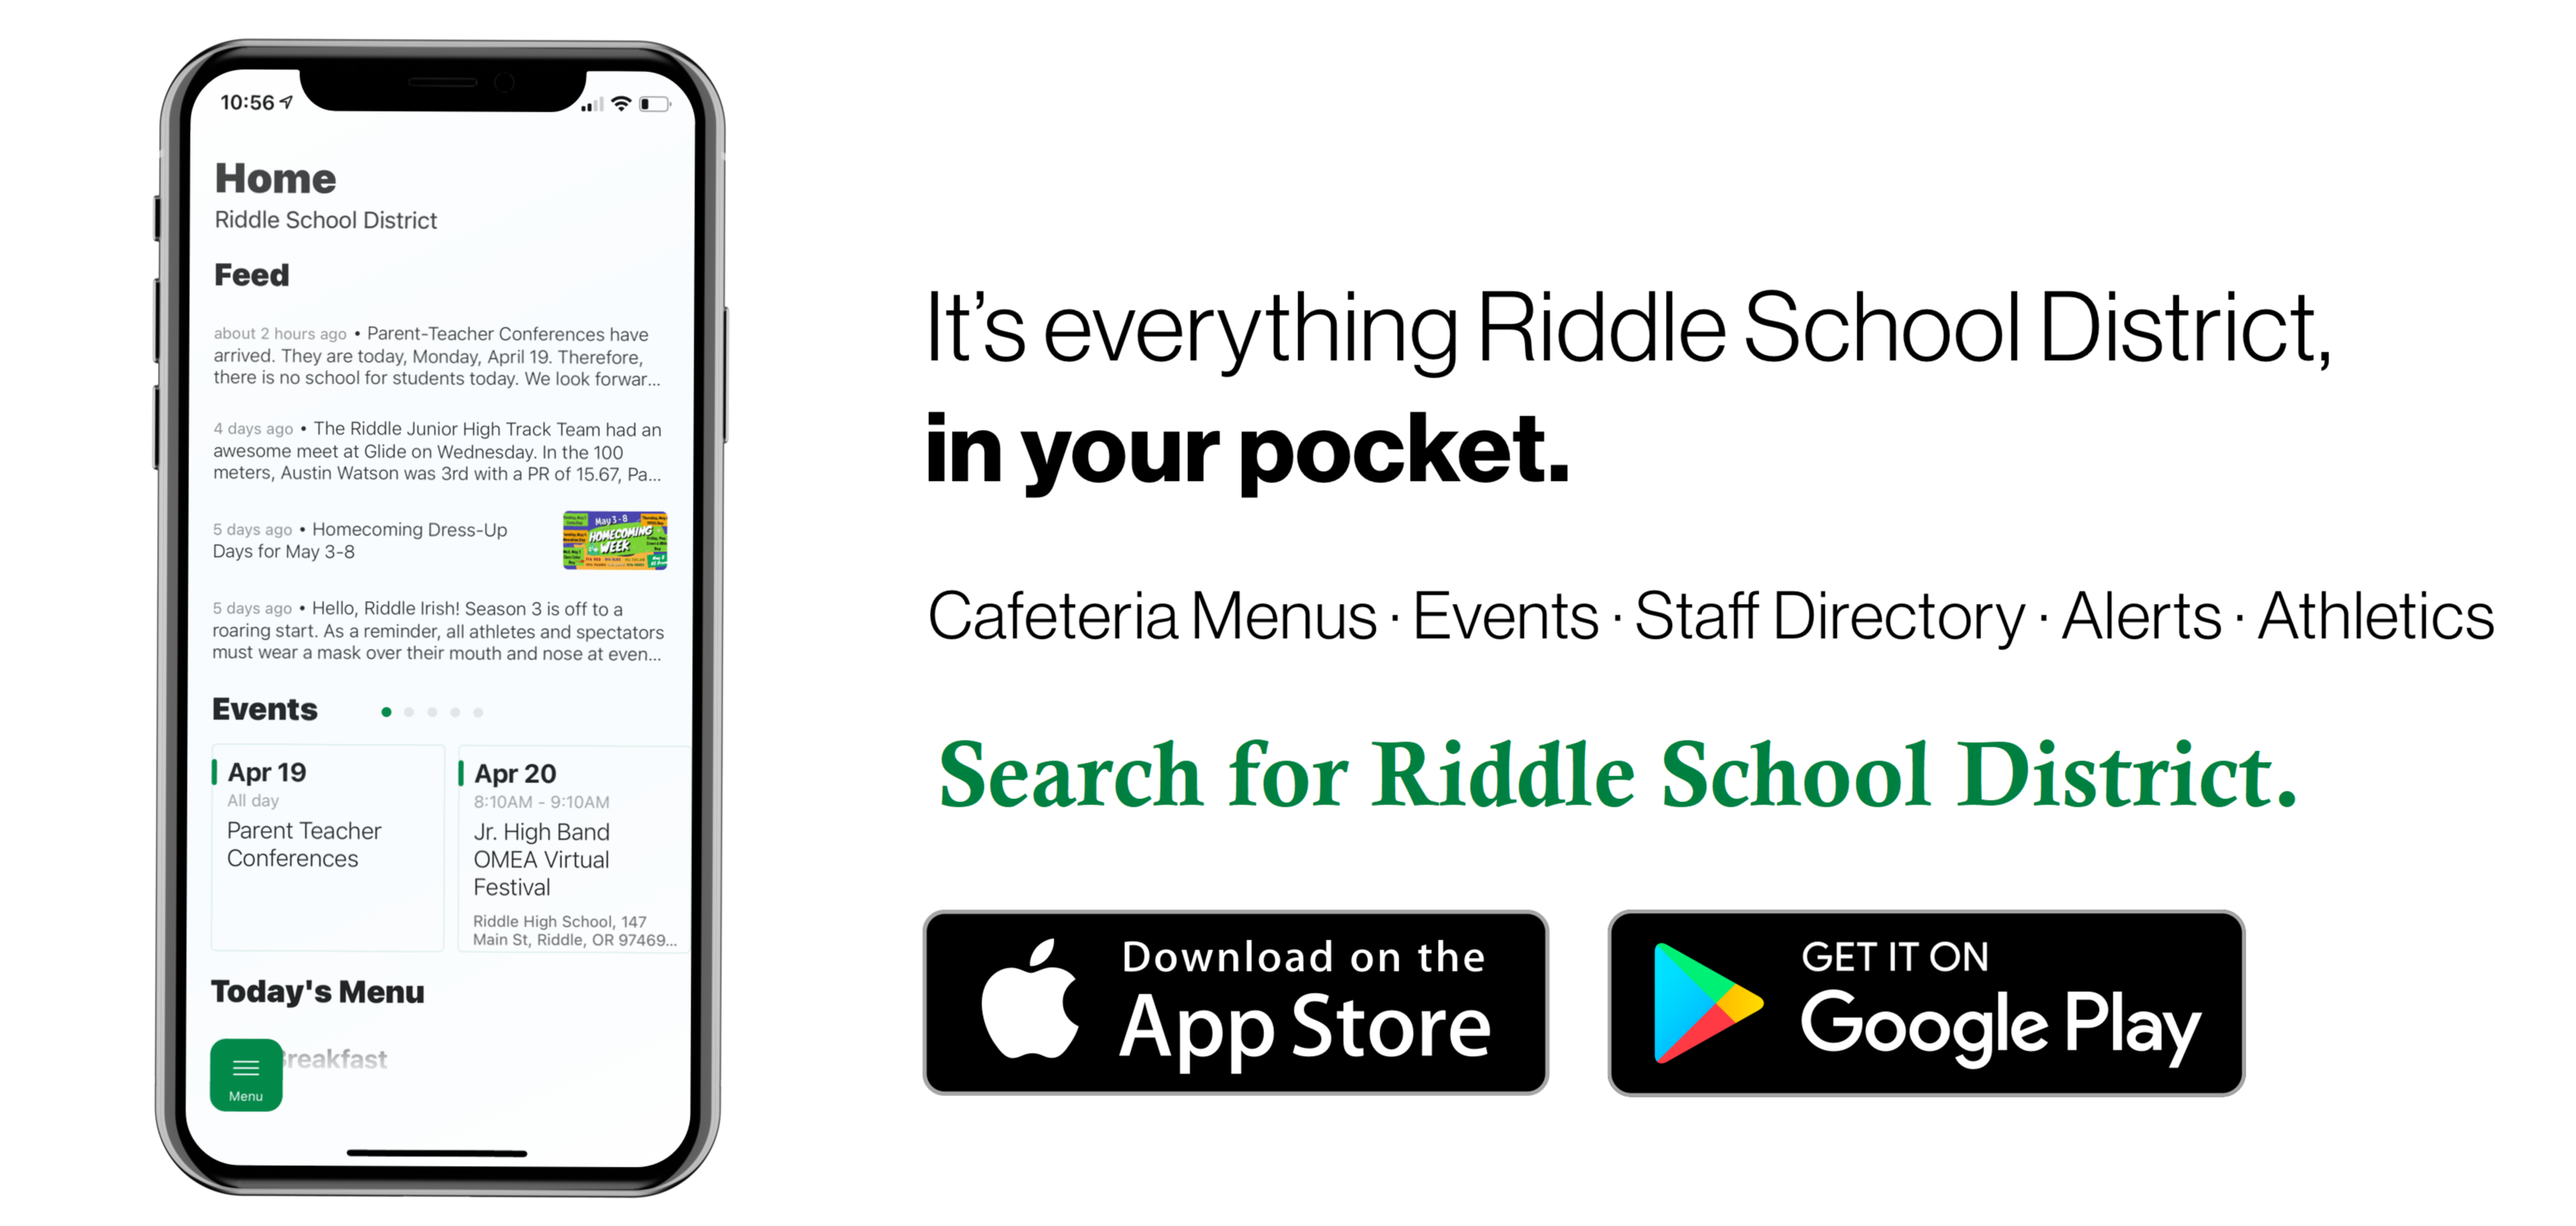 Riddle School District app is now available on the app stores.